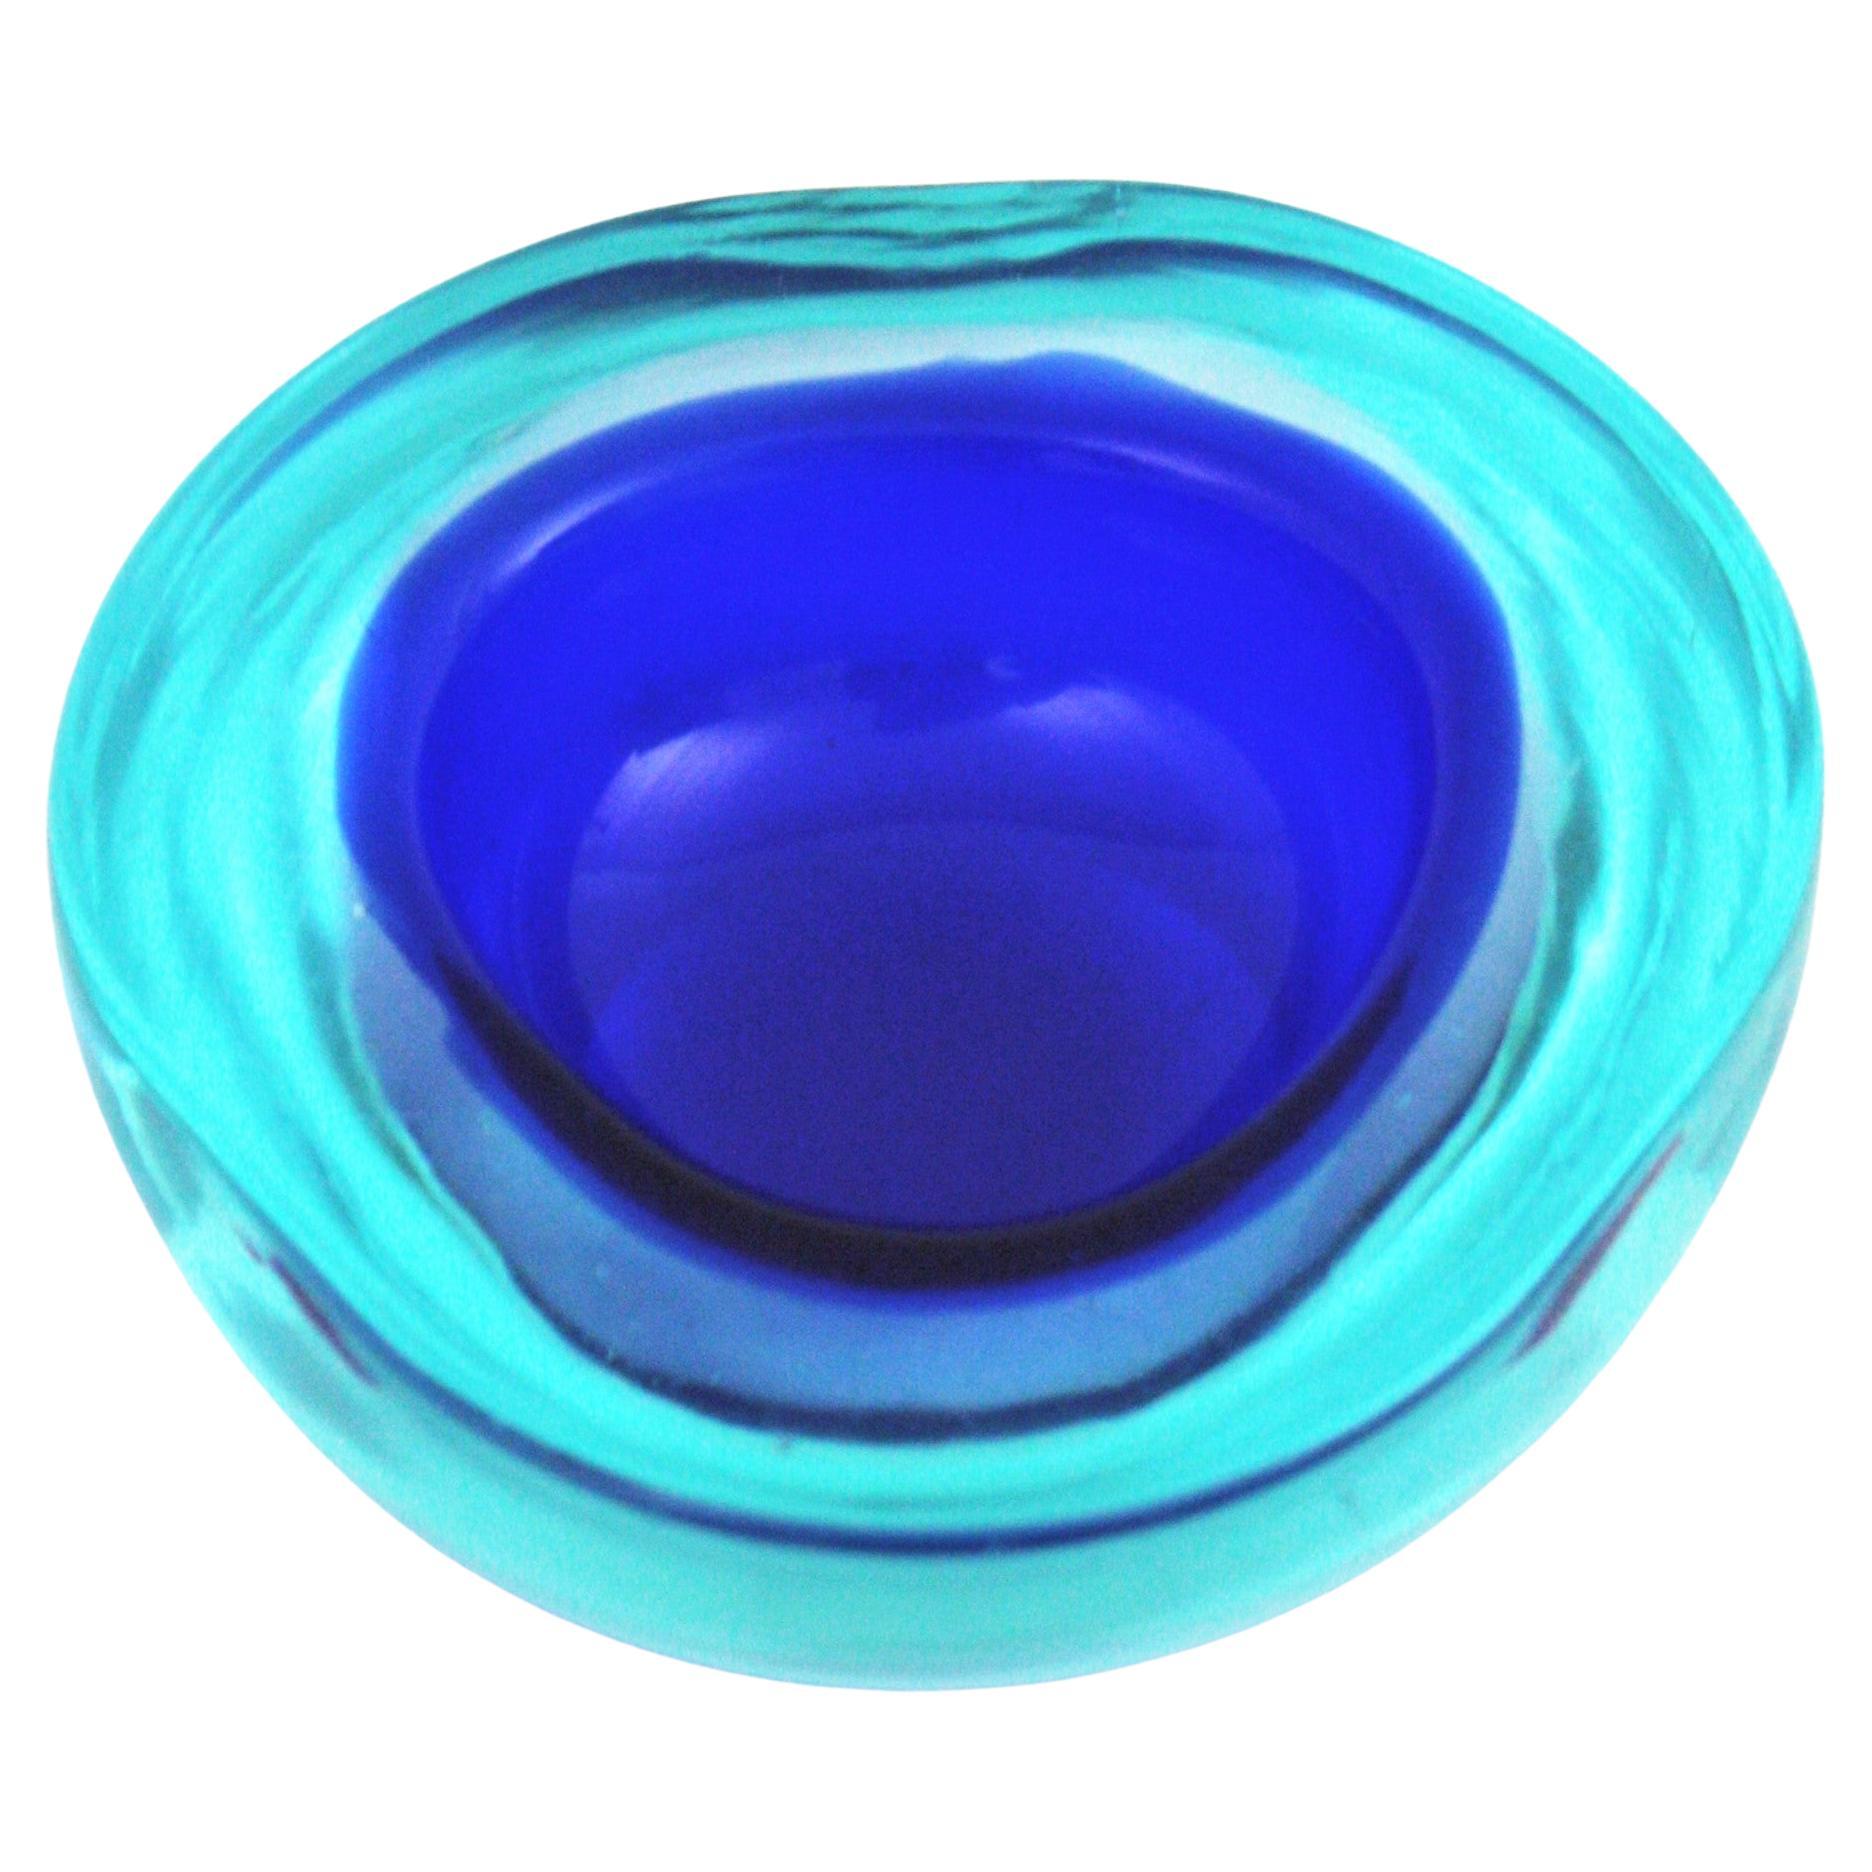 Archimede Seguso Murano Small Sommerso Blue Glass Geode Bowl, 1960s For Sale